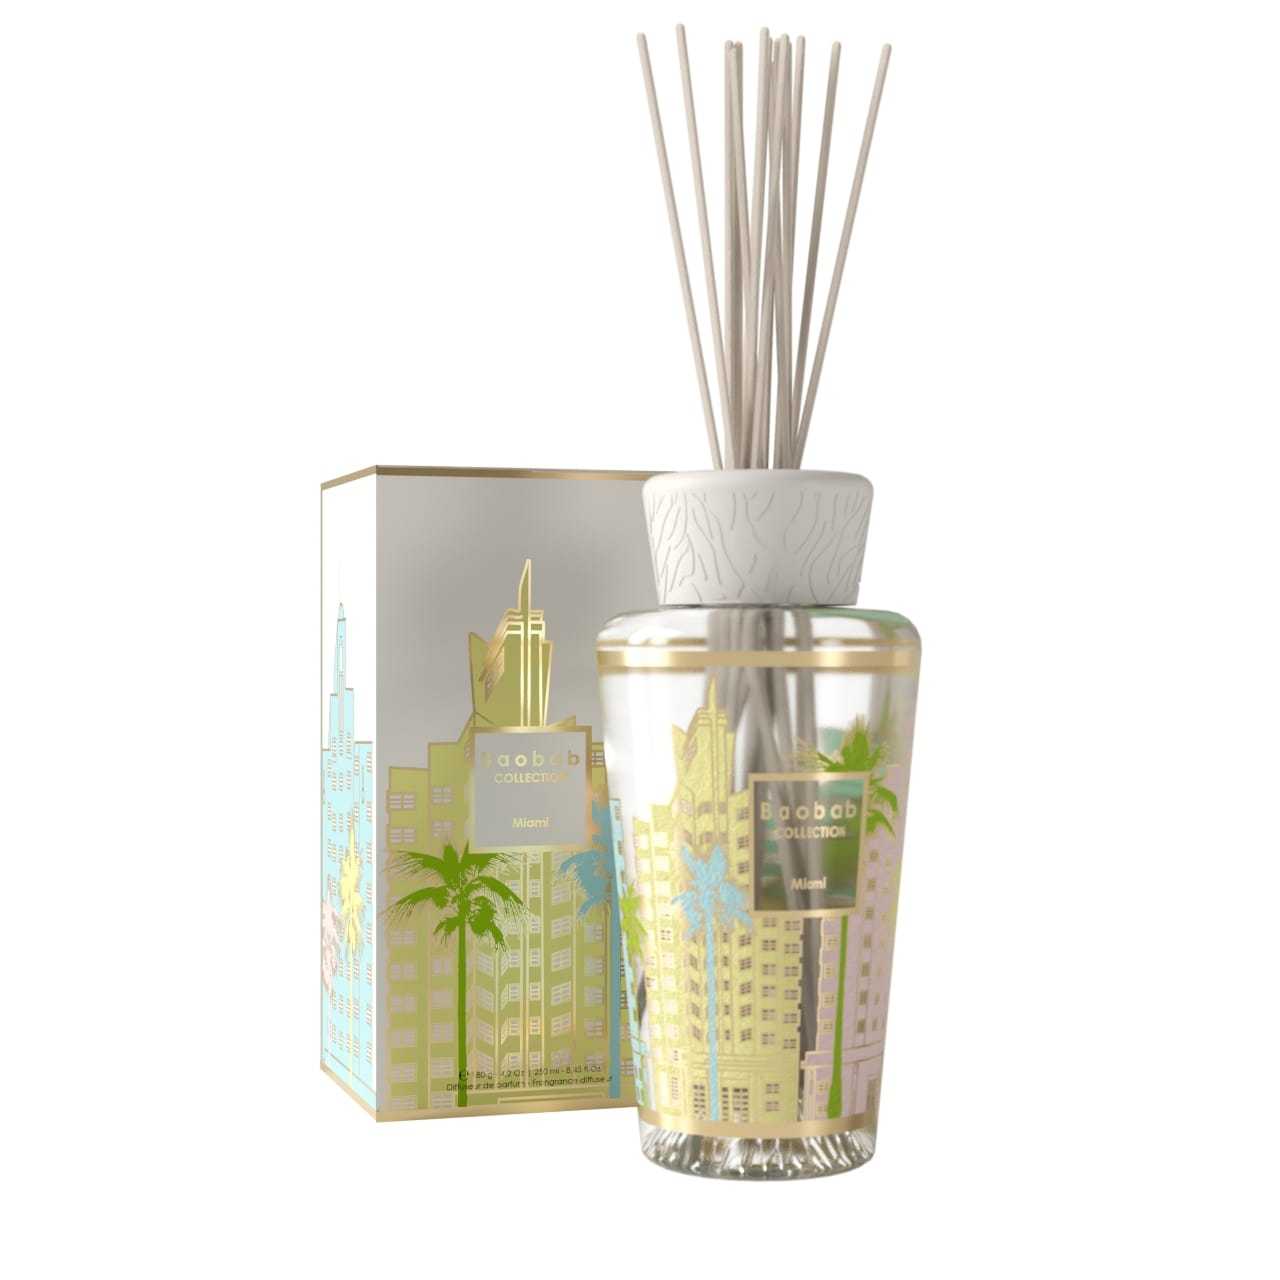 Baobab collection my first baobab miami diffuser